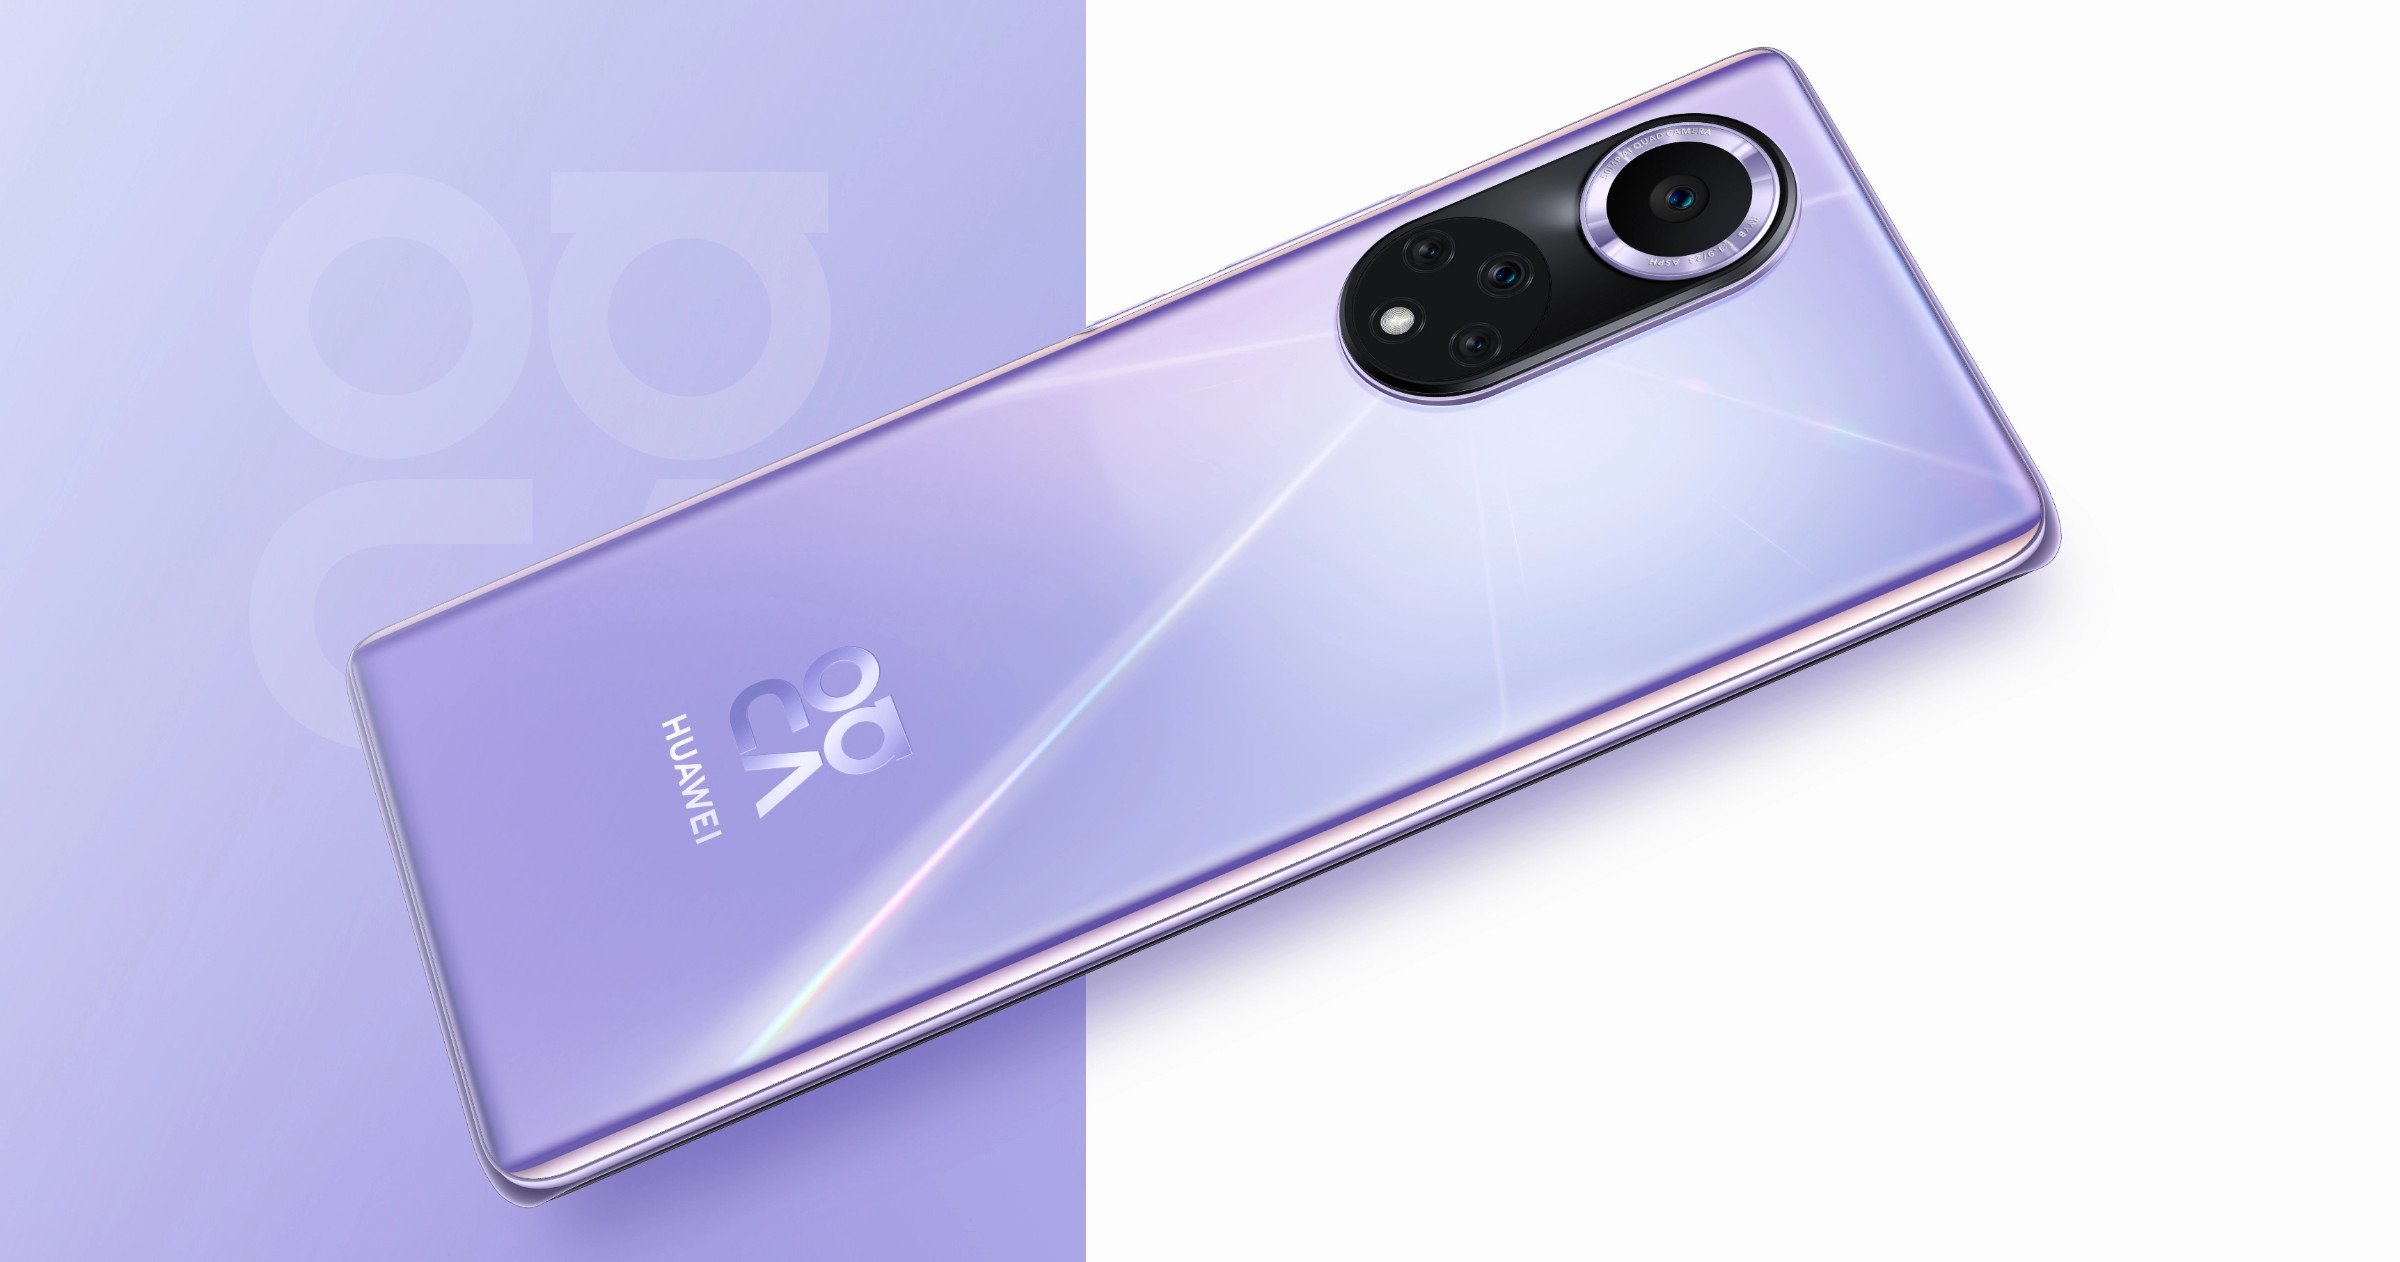 Insider: Huawei Nova 9 with Snapdragon 778G chip and €549 price tag will go on sale in Europe